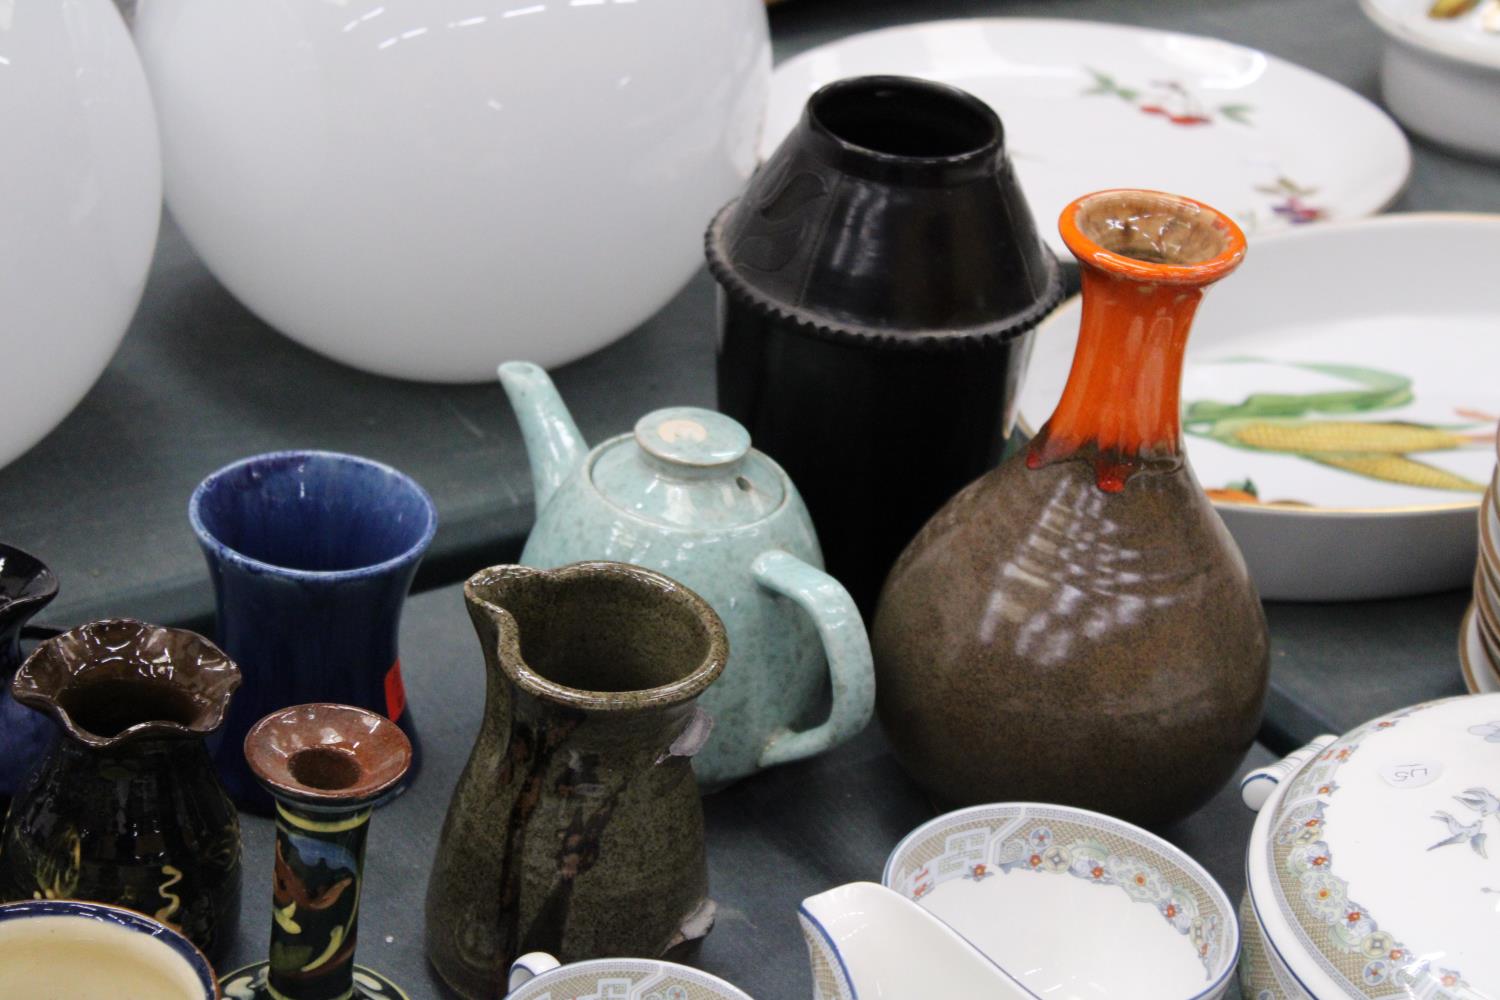 A QUANTITY OF STUDIO POTTERY TO INCLUDE A TEAPOT, CANDLE HOLDER, BOWLS ETC - SOME WITH MARKS TO - Image 6 of 6